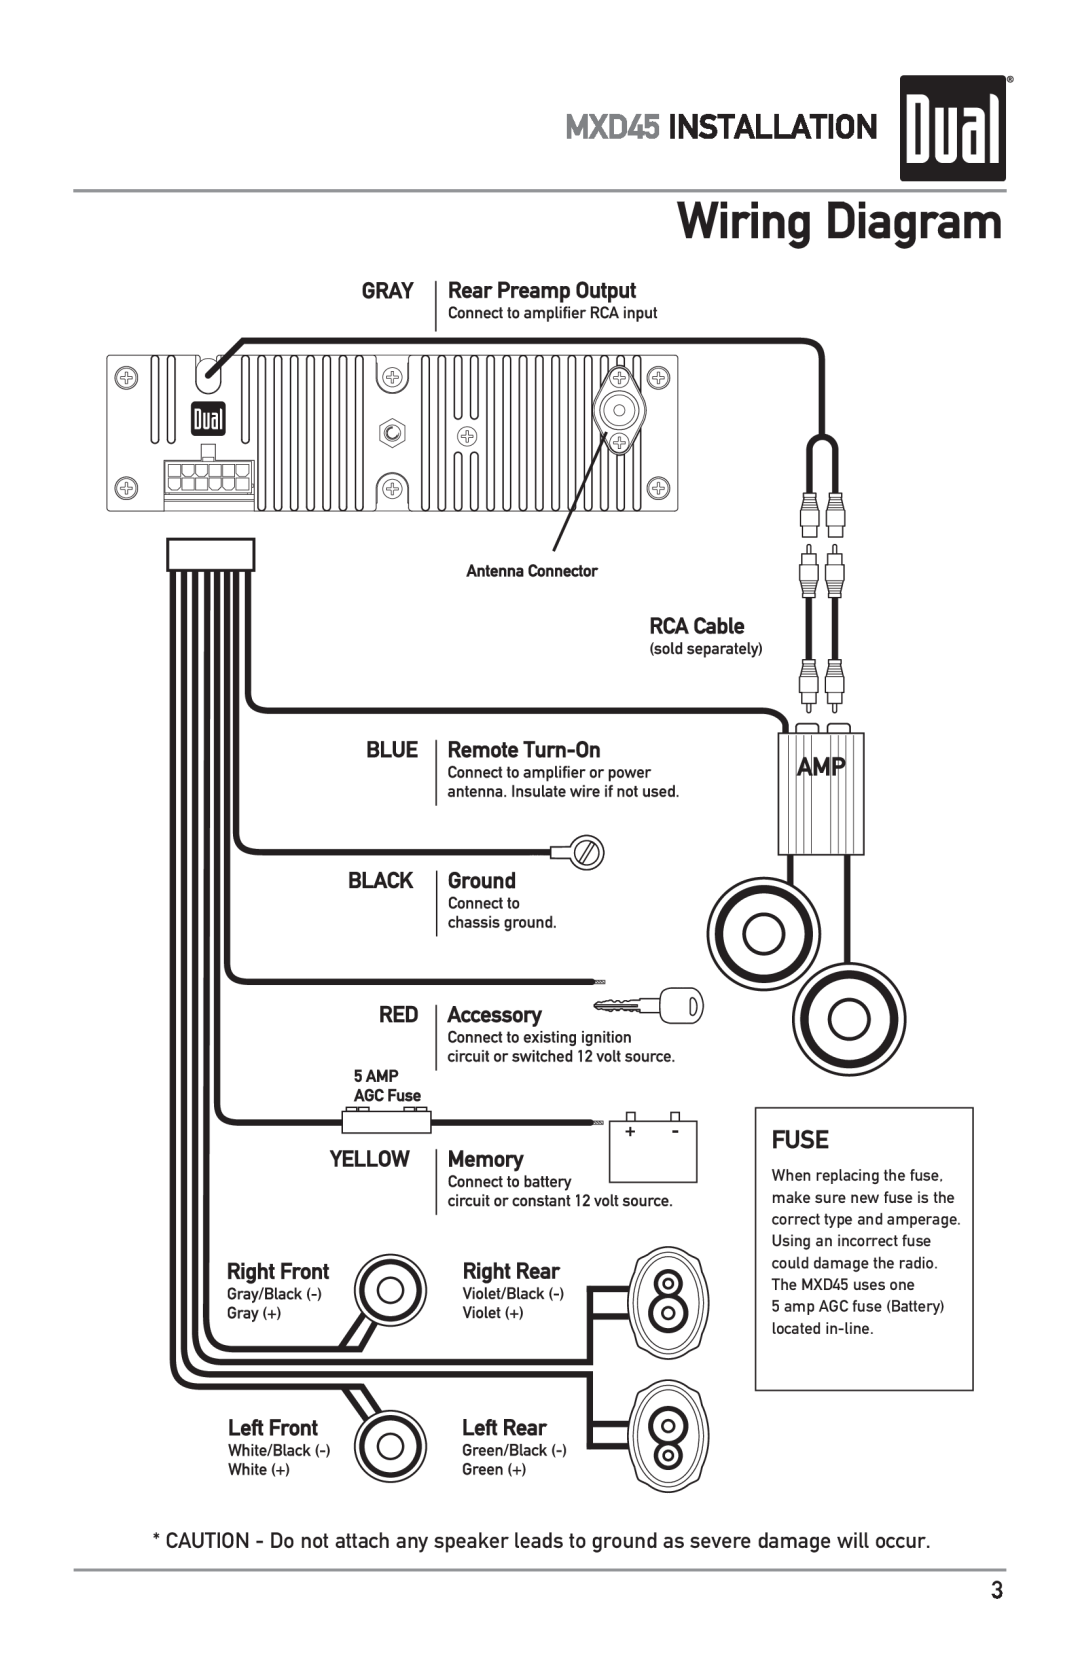 Dual owner manual Wiring Diagram, Fuse, MXD45 INSTALLATION, amp AGC fuse Battery located in-line 